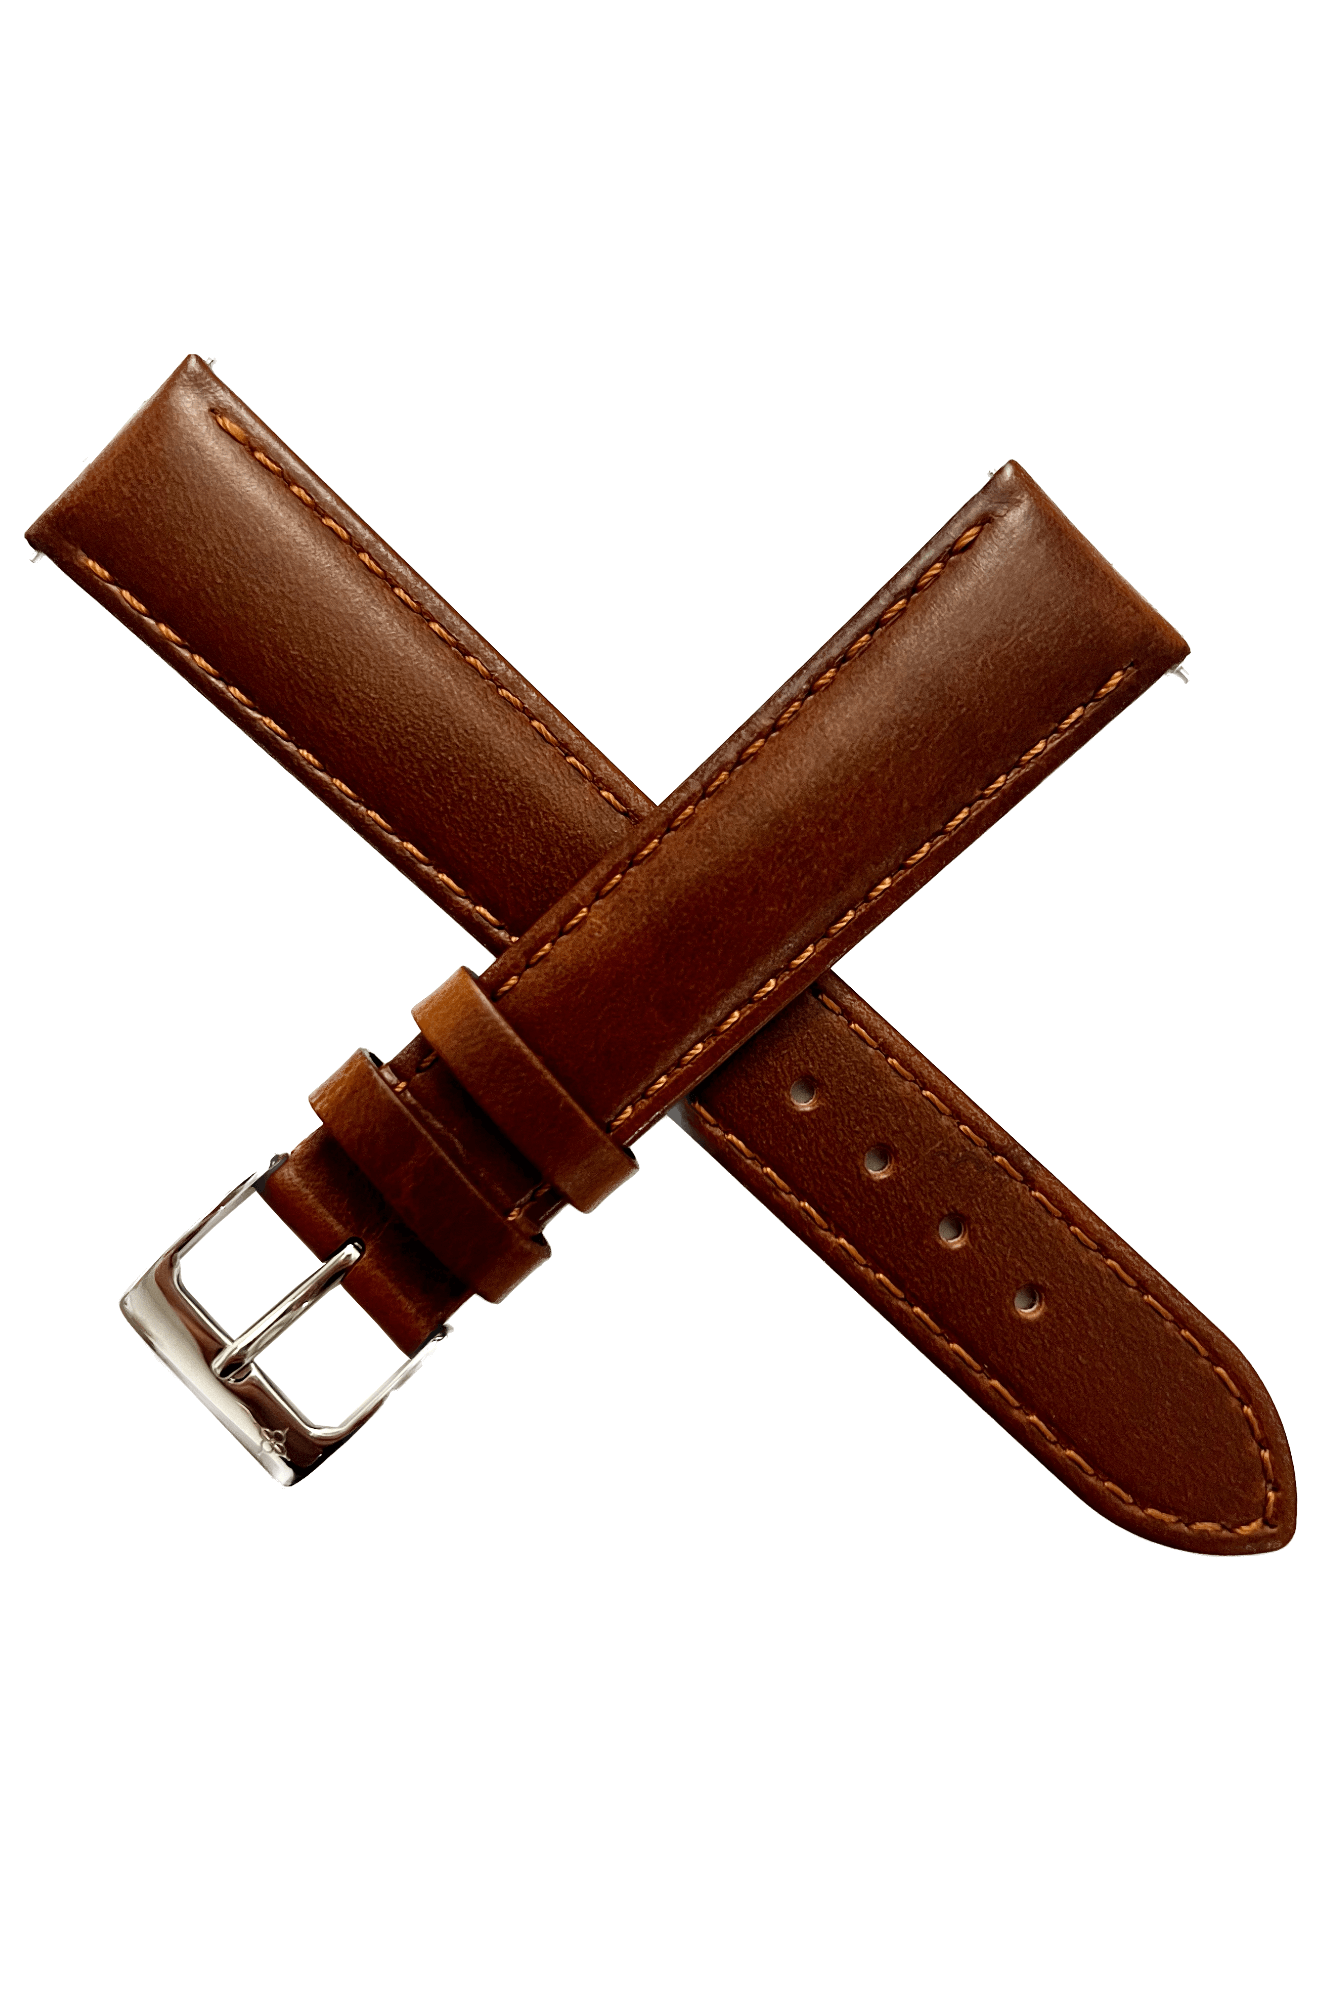 Vintage Brown Italian Leather Strap